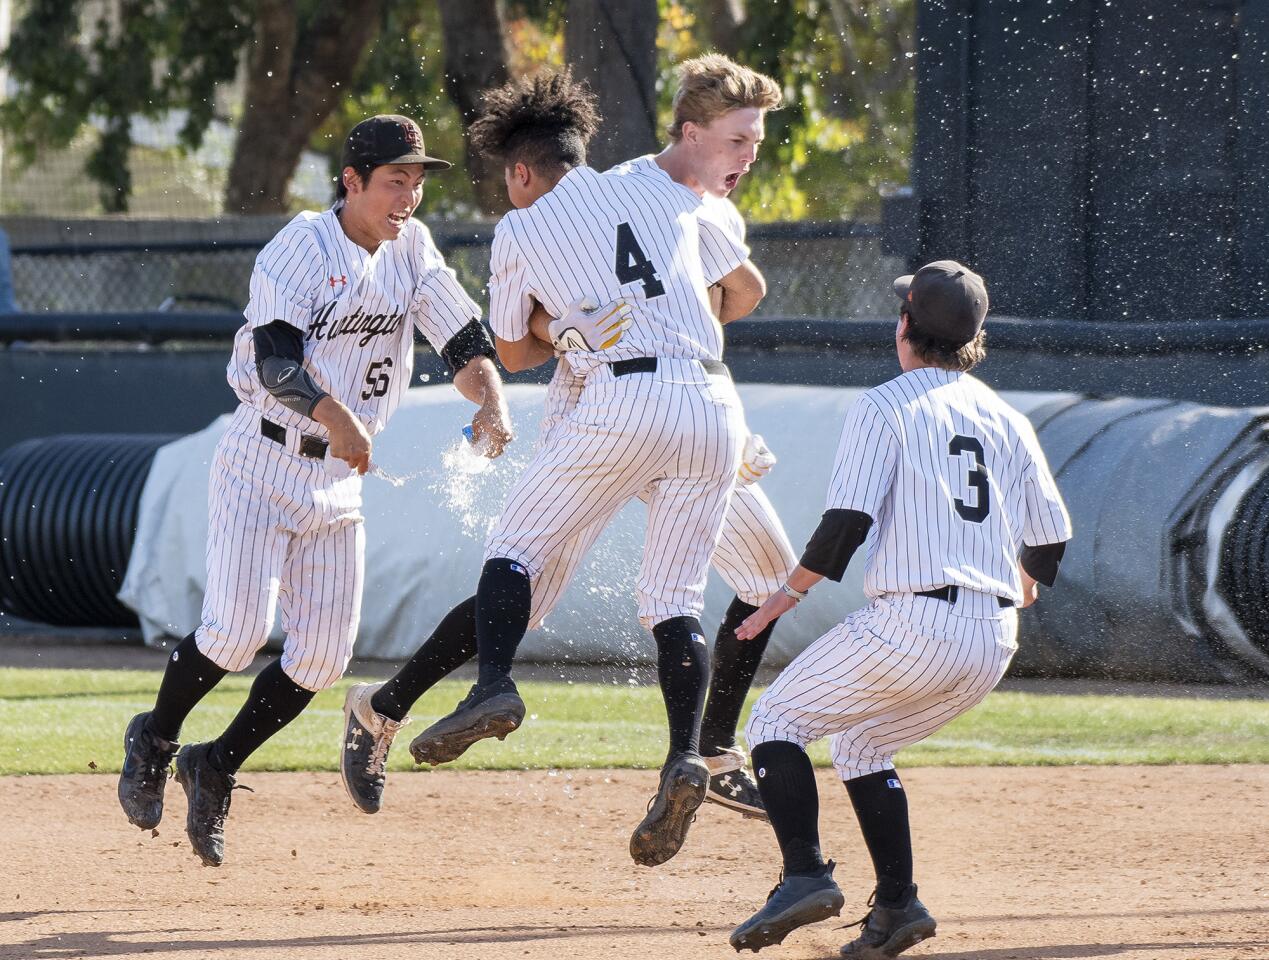 Jag Burden, center, is mobbed by Huntington Beach High teammates Ken Takada (56), Edward Pelc (4) and Brady Malpass (3) after his walk-off hit lifted the Oilers to a 2-1 win over La Puente Bishop Amat in the second round of the CIF Southern Section Division 1 playoffs at home on Tuesday.